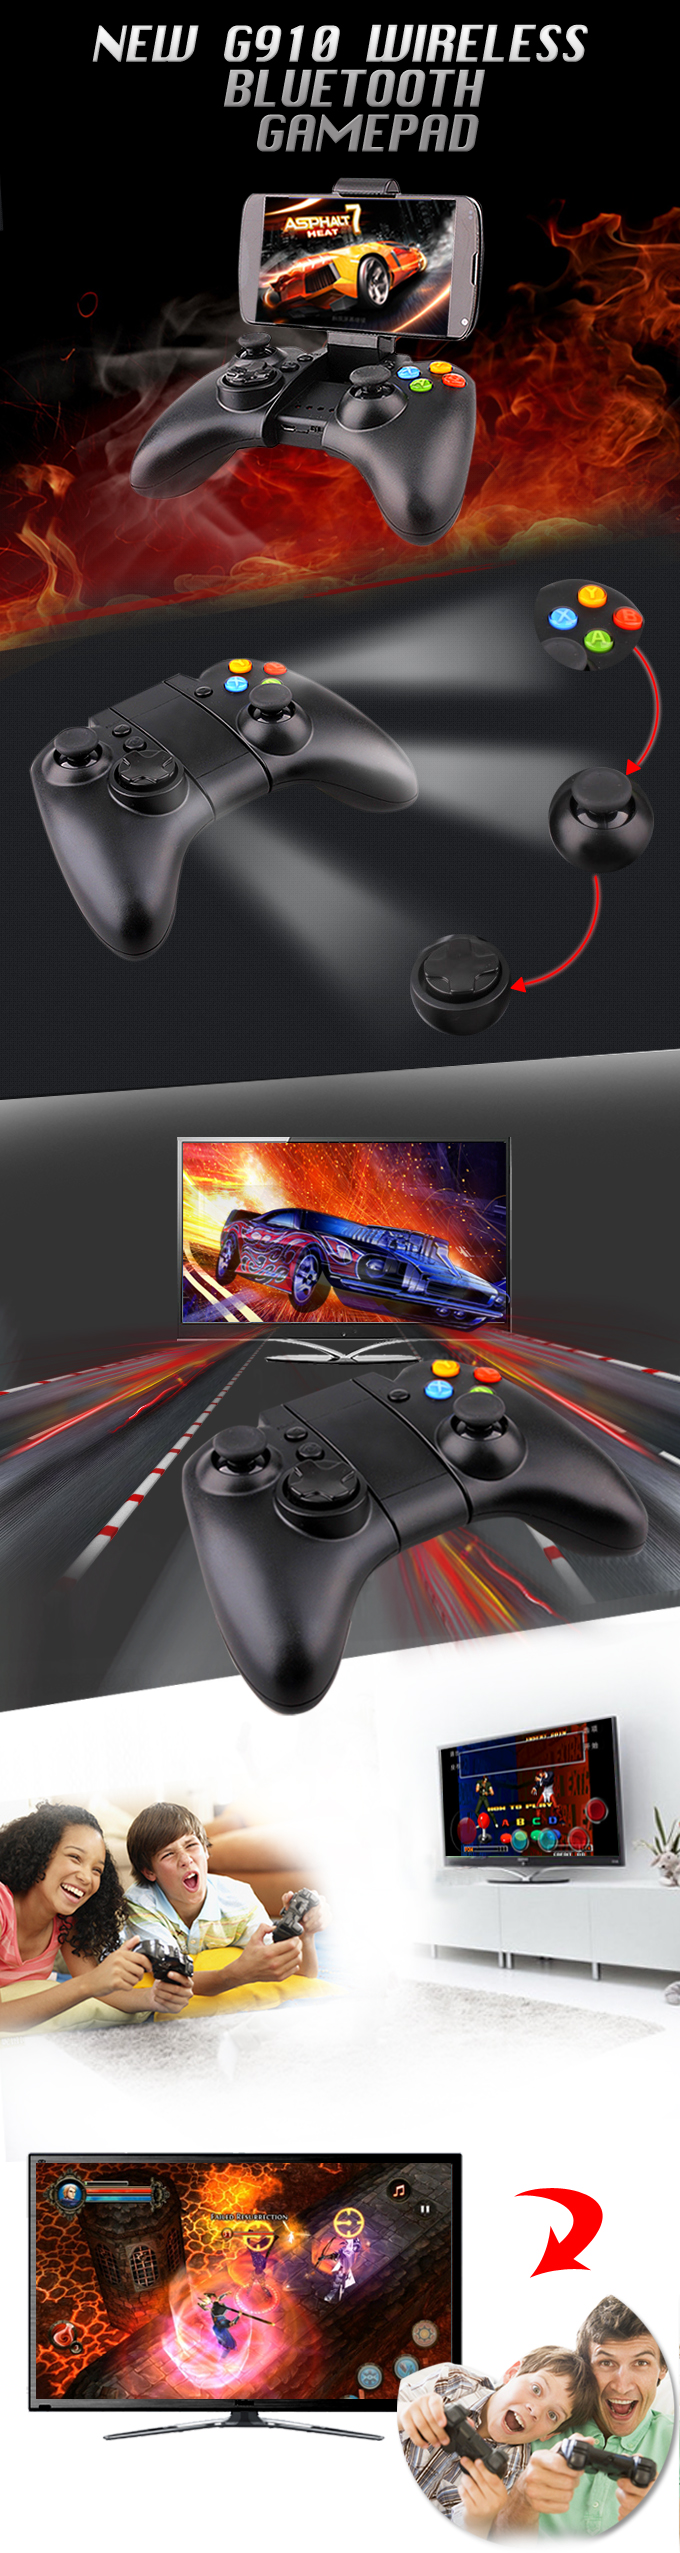 G910 Bluetooth Wireless Gamepad for Android TV BOX Review and Firmware